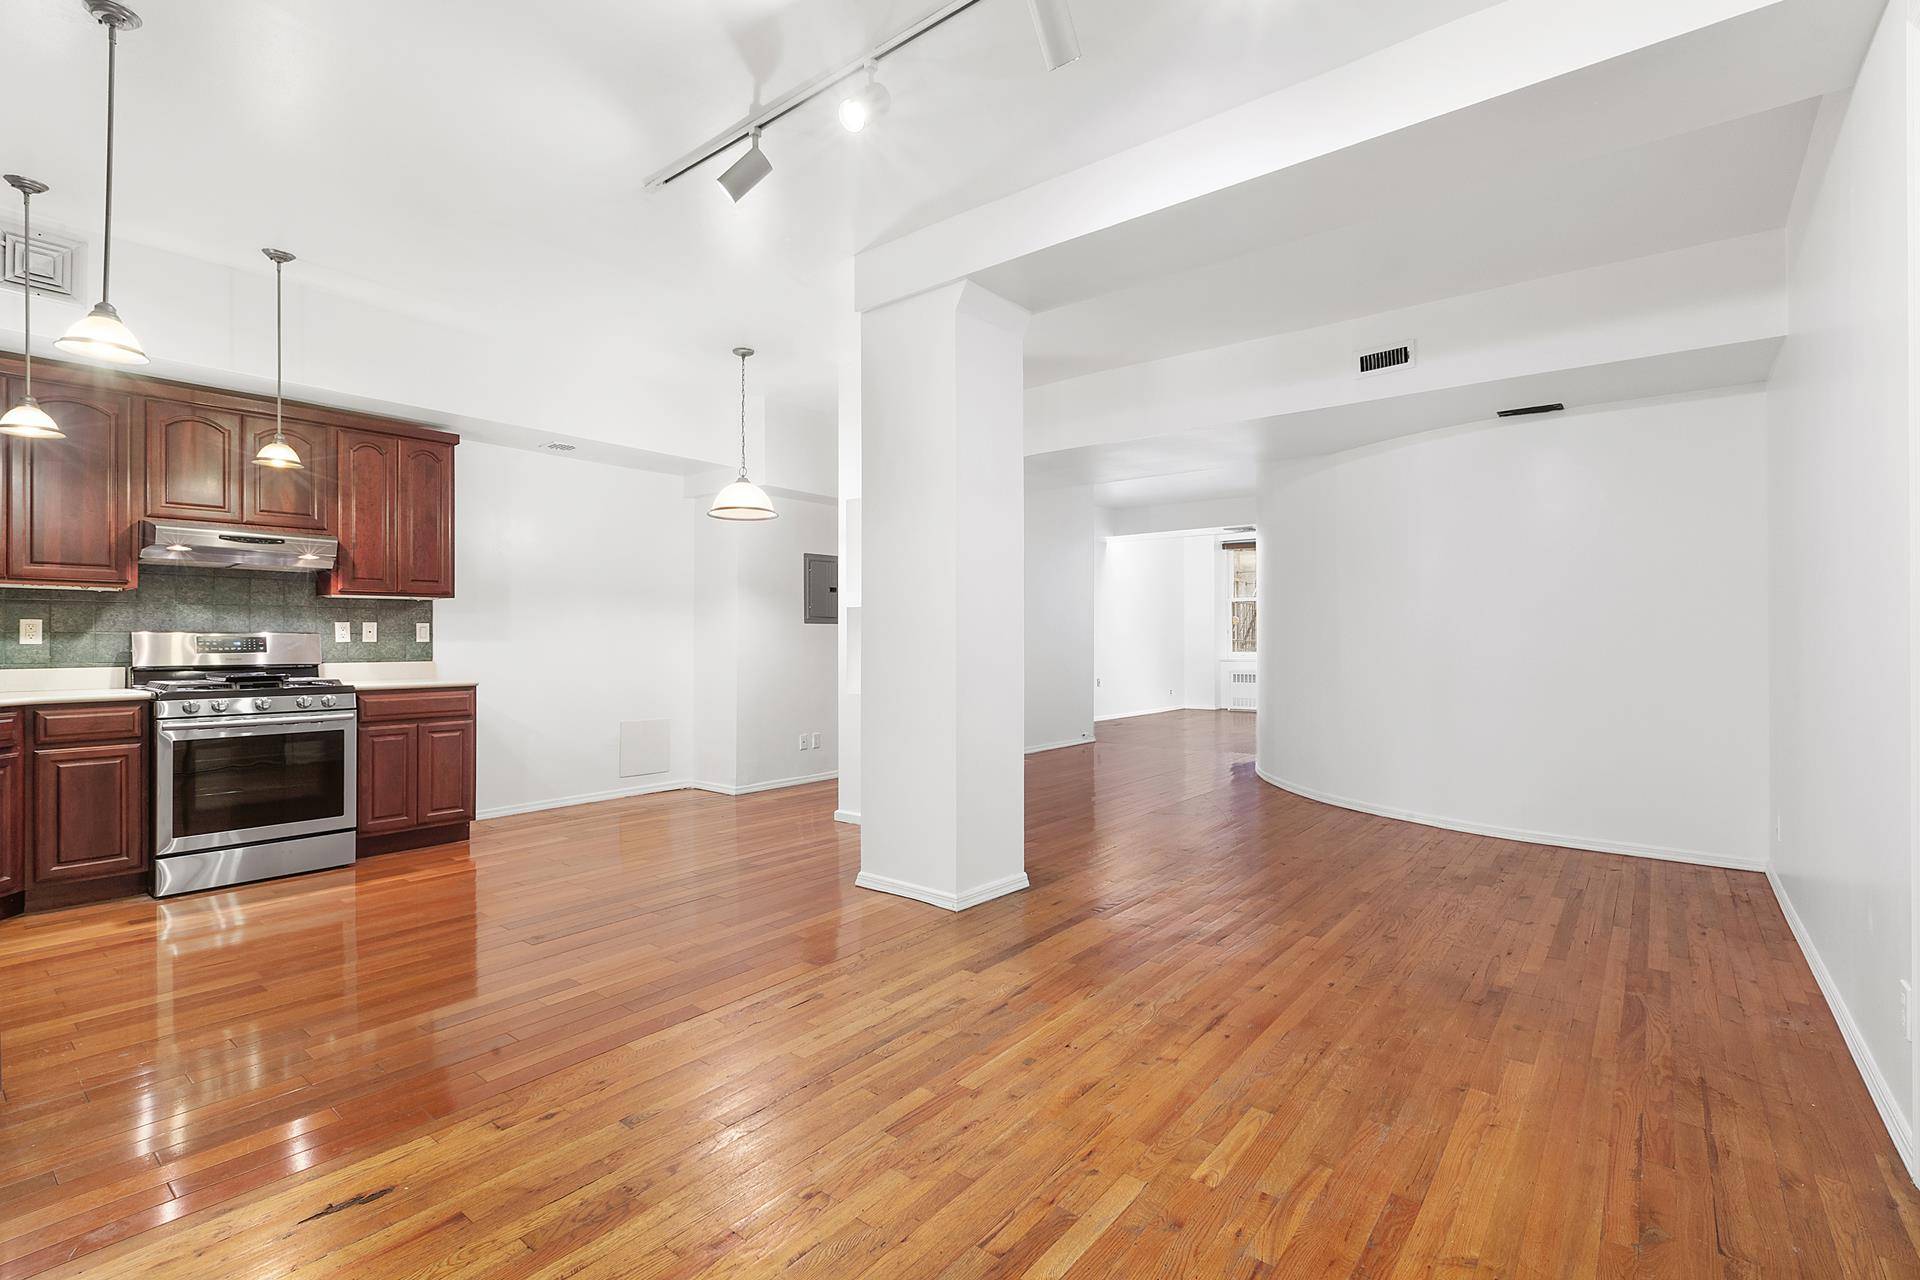 Spacious 1100sf loft with tall ceilings and a 50 foot great room.